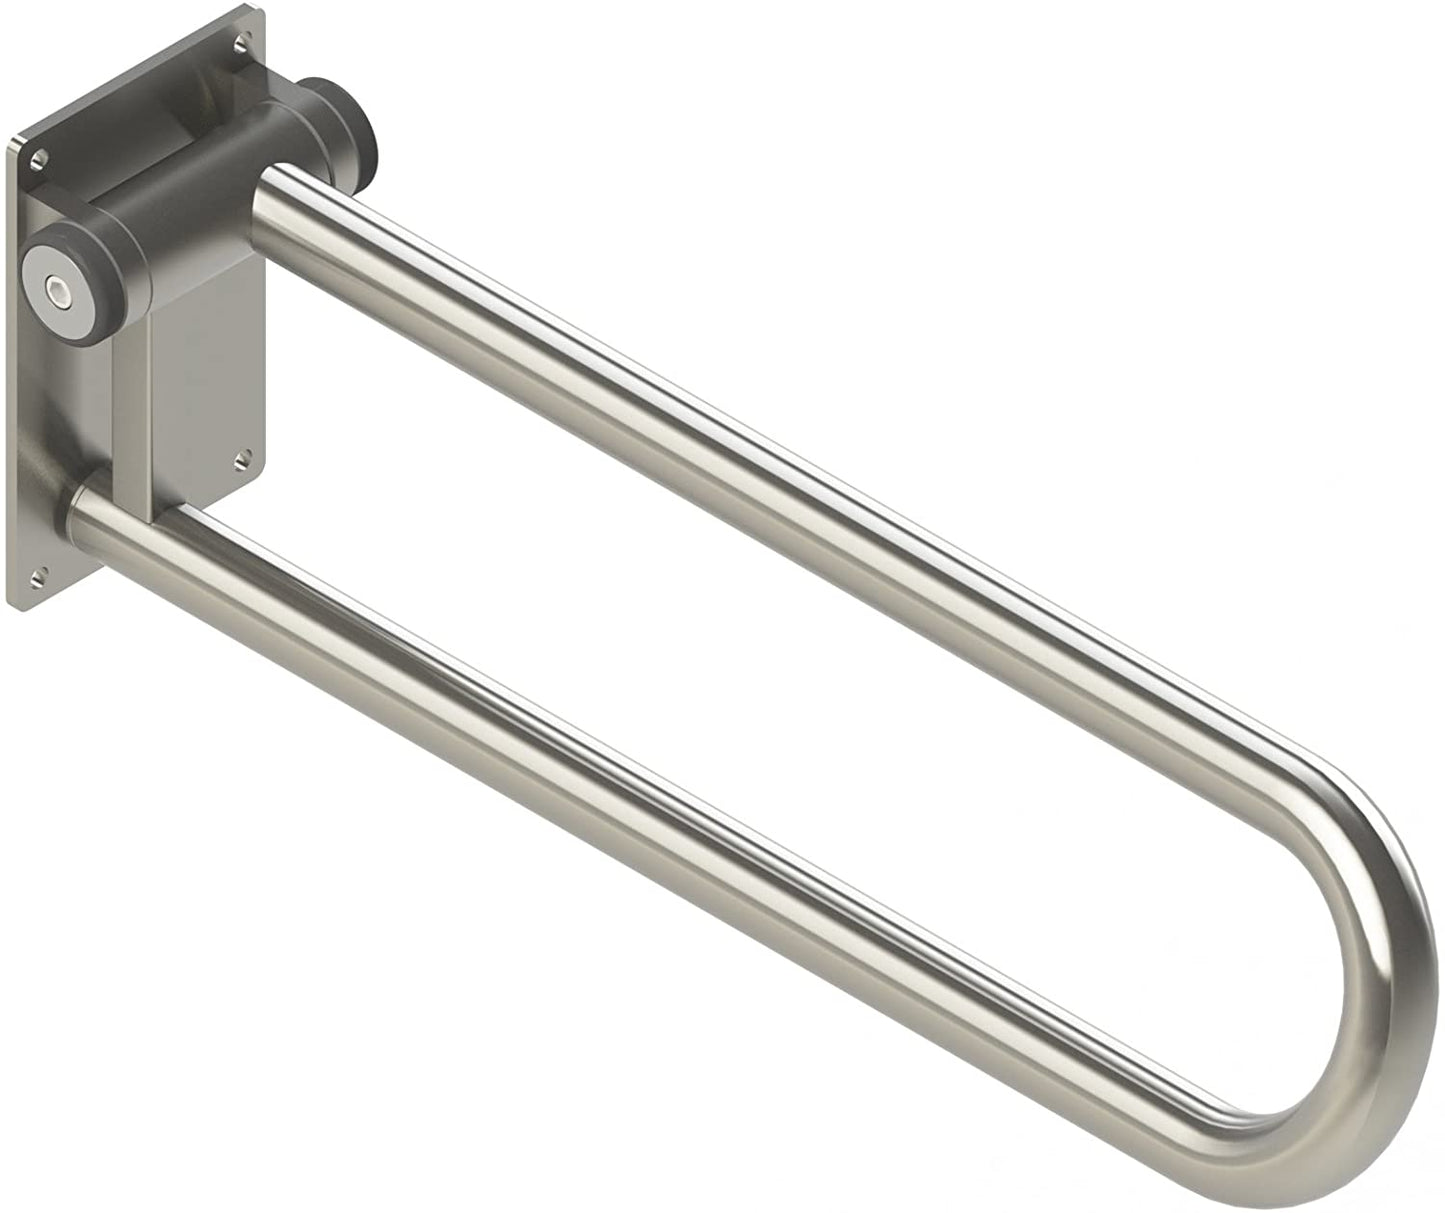 HealthCraft,PT-WR28R-SS,Stainless Steel,Stainless Steel,28"